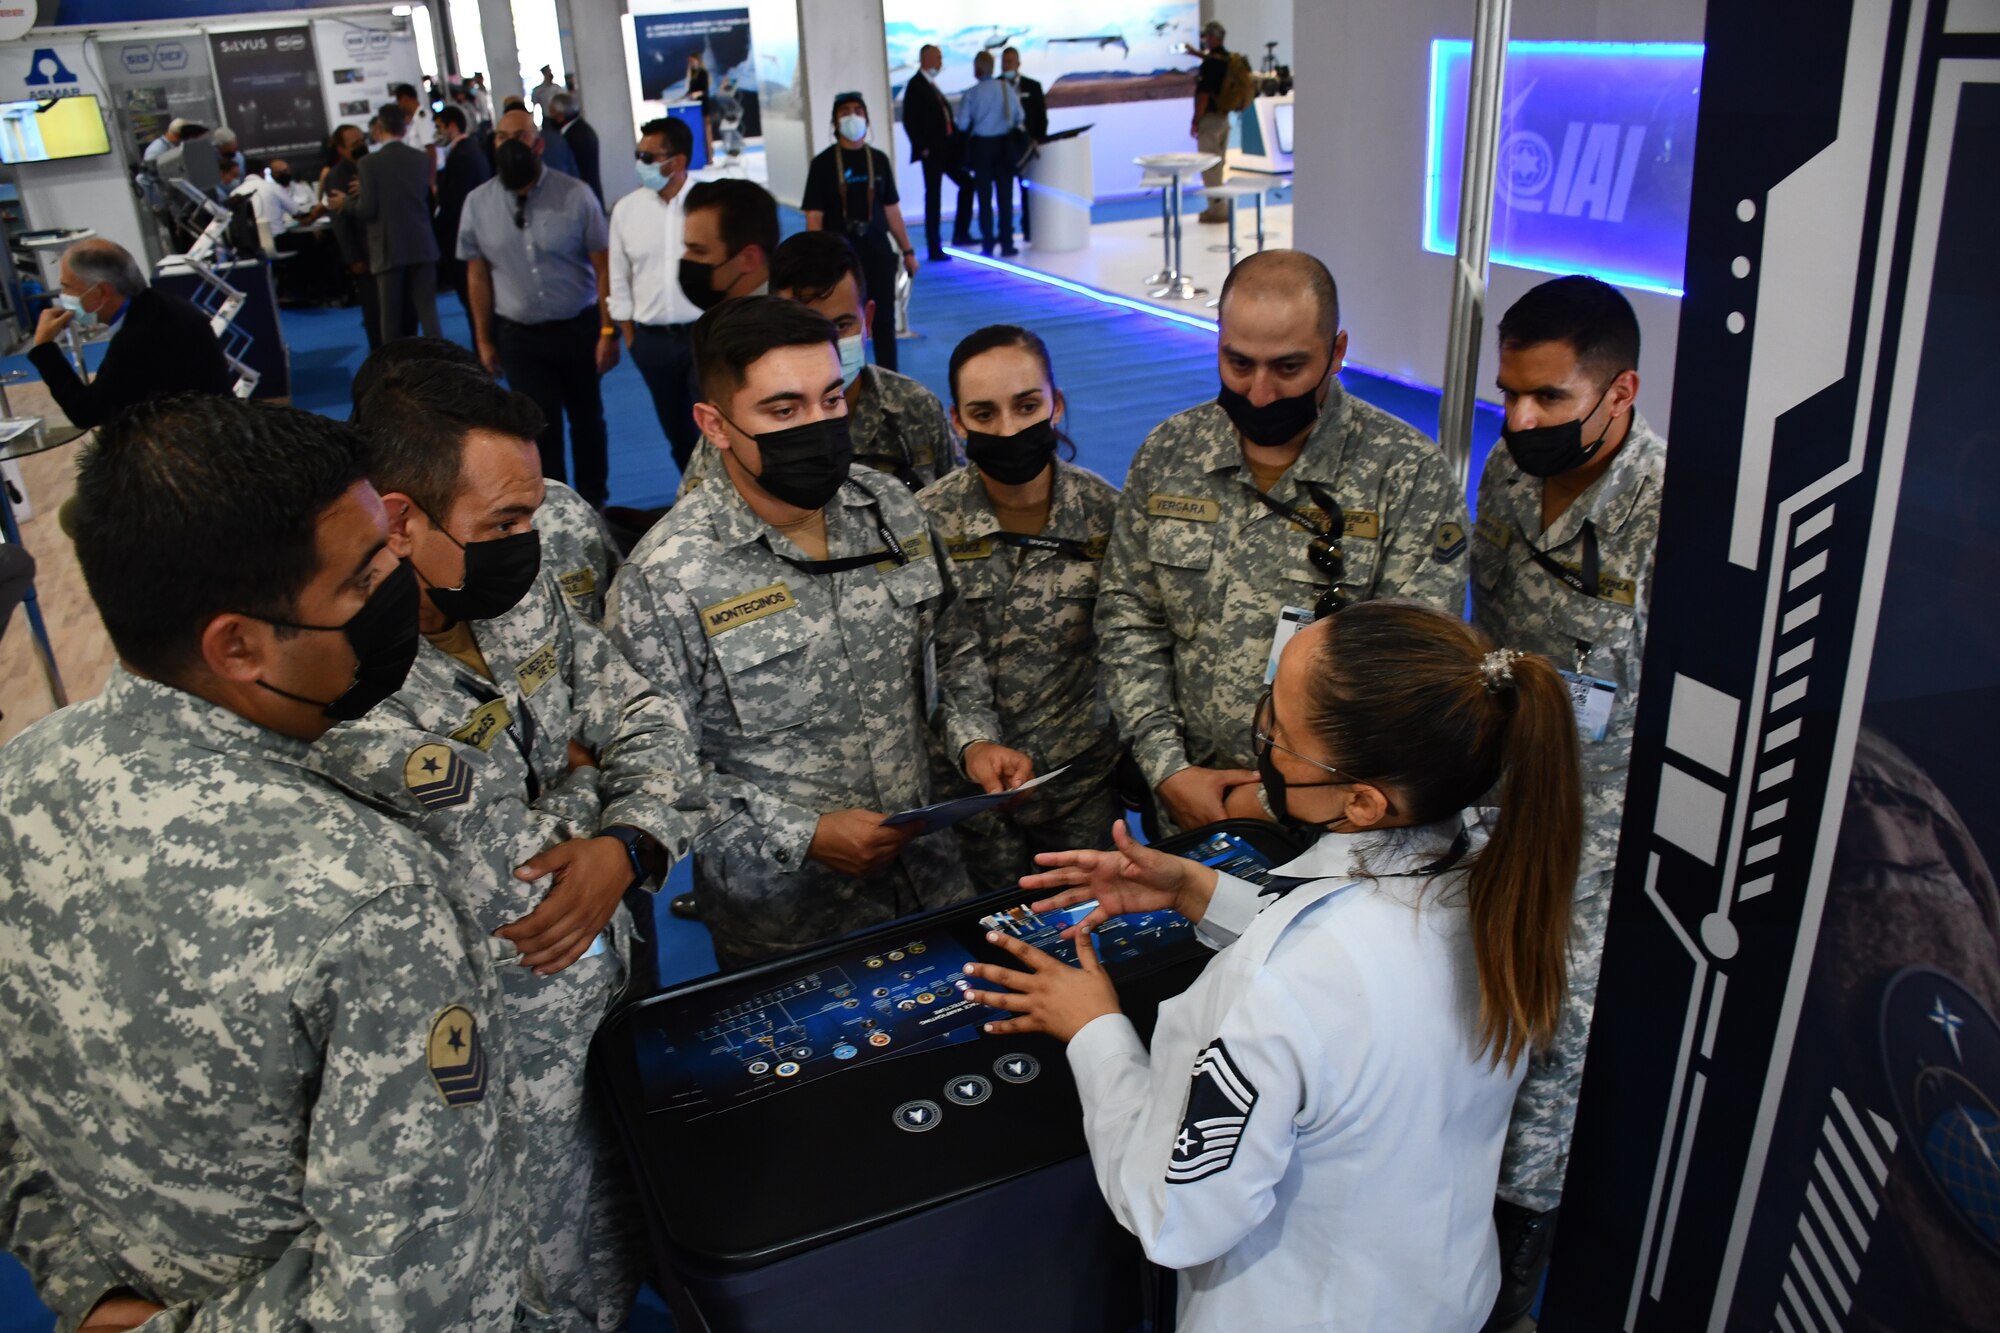 Senior Master Sgt. Julia Valenzuela, 11th Space Warning Squadron, discusses the U.S. Space Force mission with members of the Chilean Air Force on April 5, 2022. U.S. Space Force Guardians hosted a U.S. Space information booth at the FIDAE (Feria International del Aire y del Espacio) Air Show, in which they met with industry partners, distinguished visitors and dignitaries from around the world during the weeklong event. (U.S. Space Force photo by 1st Lt. Rachel Brinegar)